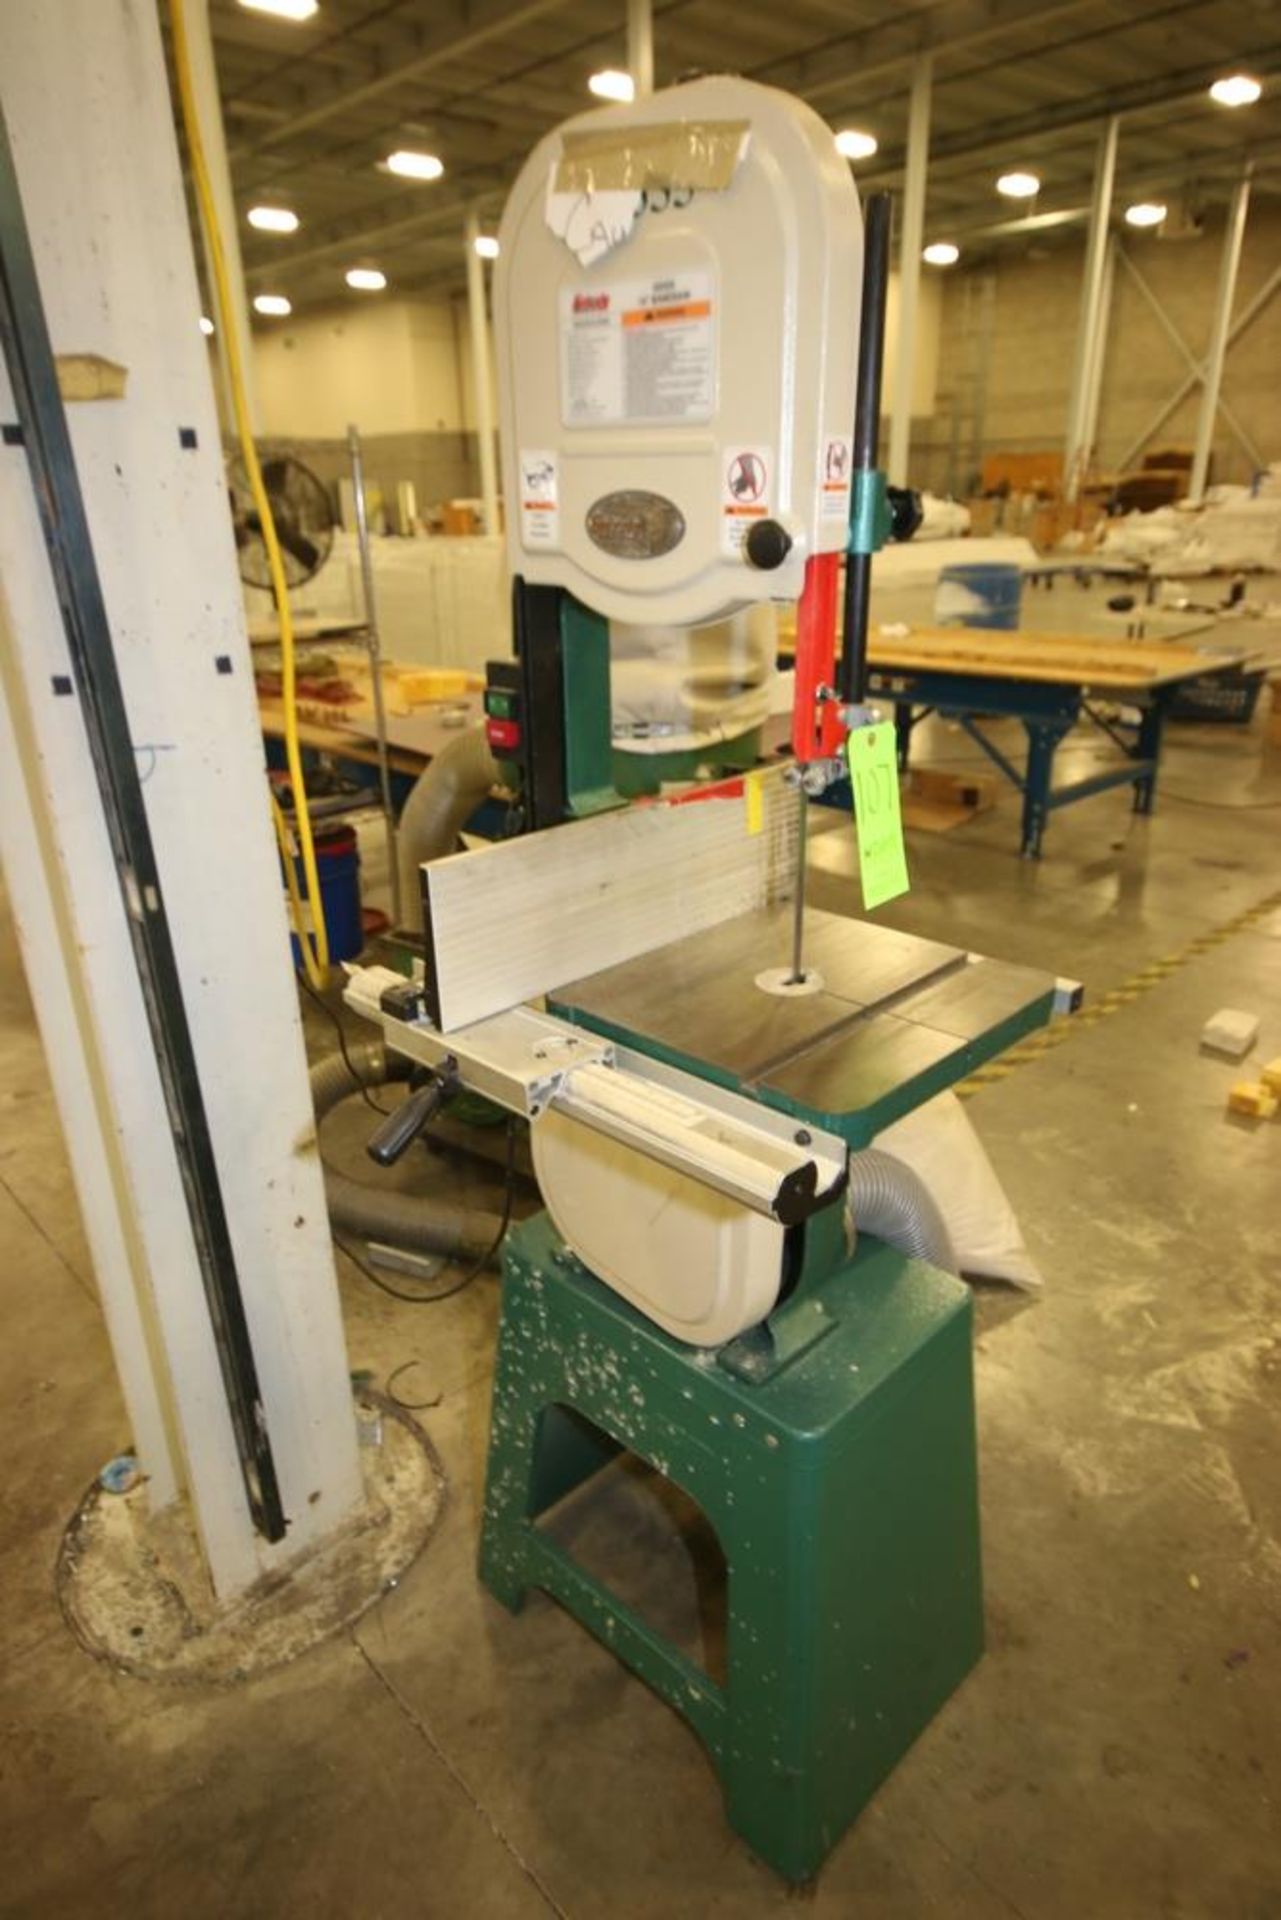 2011 Grizzly Vertical Band Saw, S/N 1102019, with 14" x 14" Table, with 1 hp Motor, 110/120 Volts, - Image 2 of 5